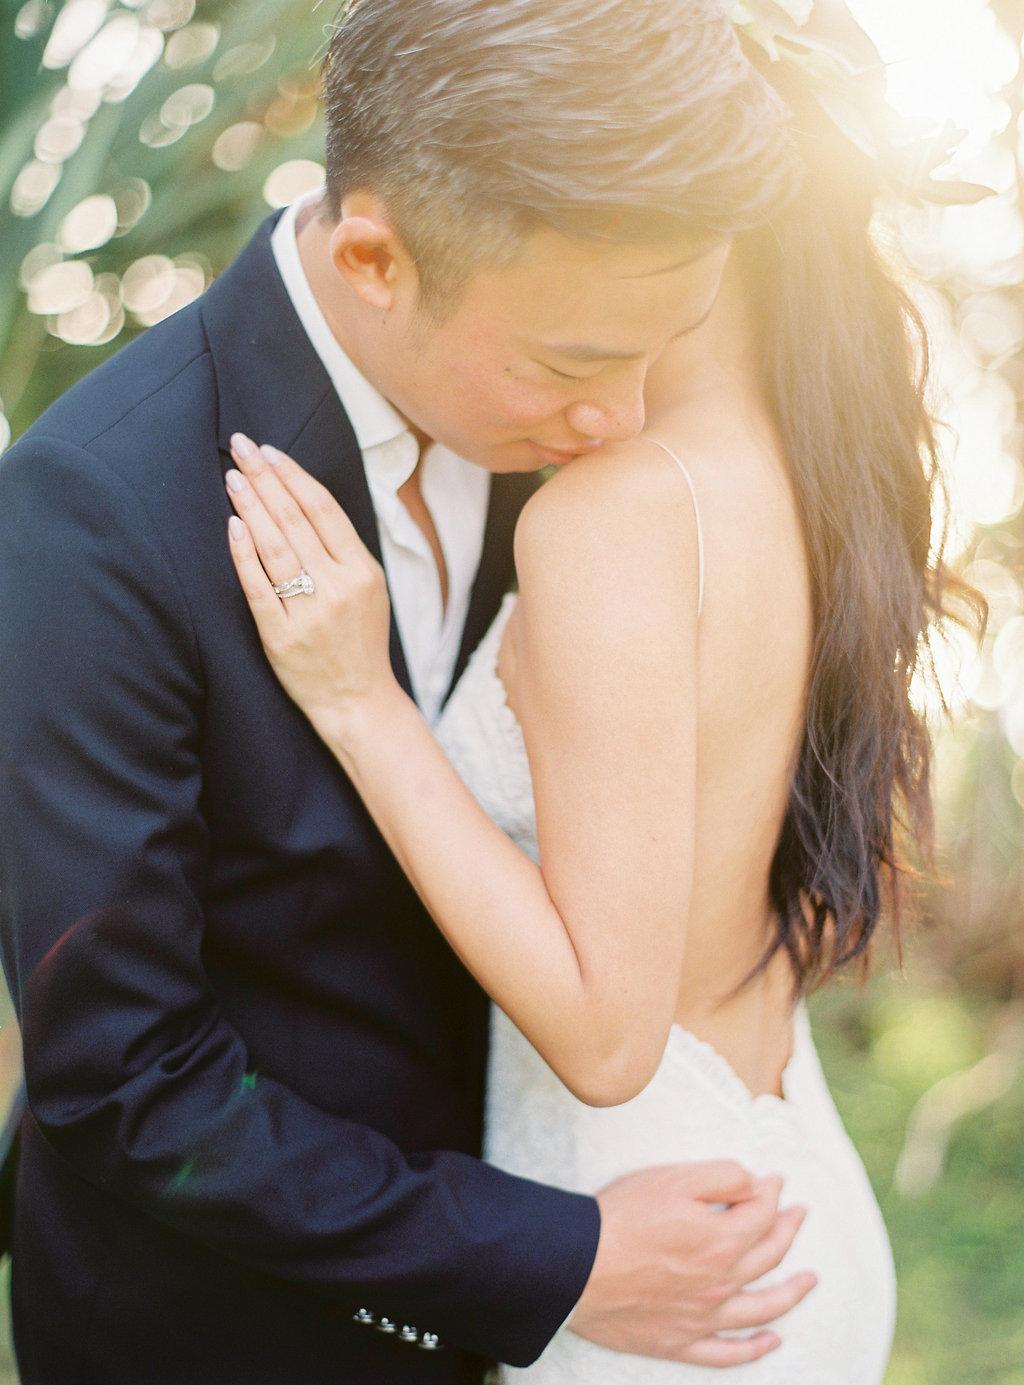 The Most Romantic ThailandSet Wedding You'll Ever See